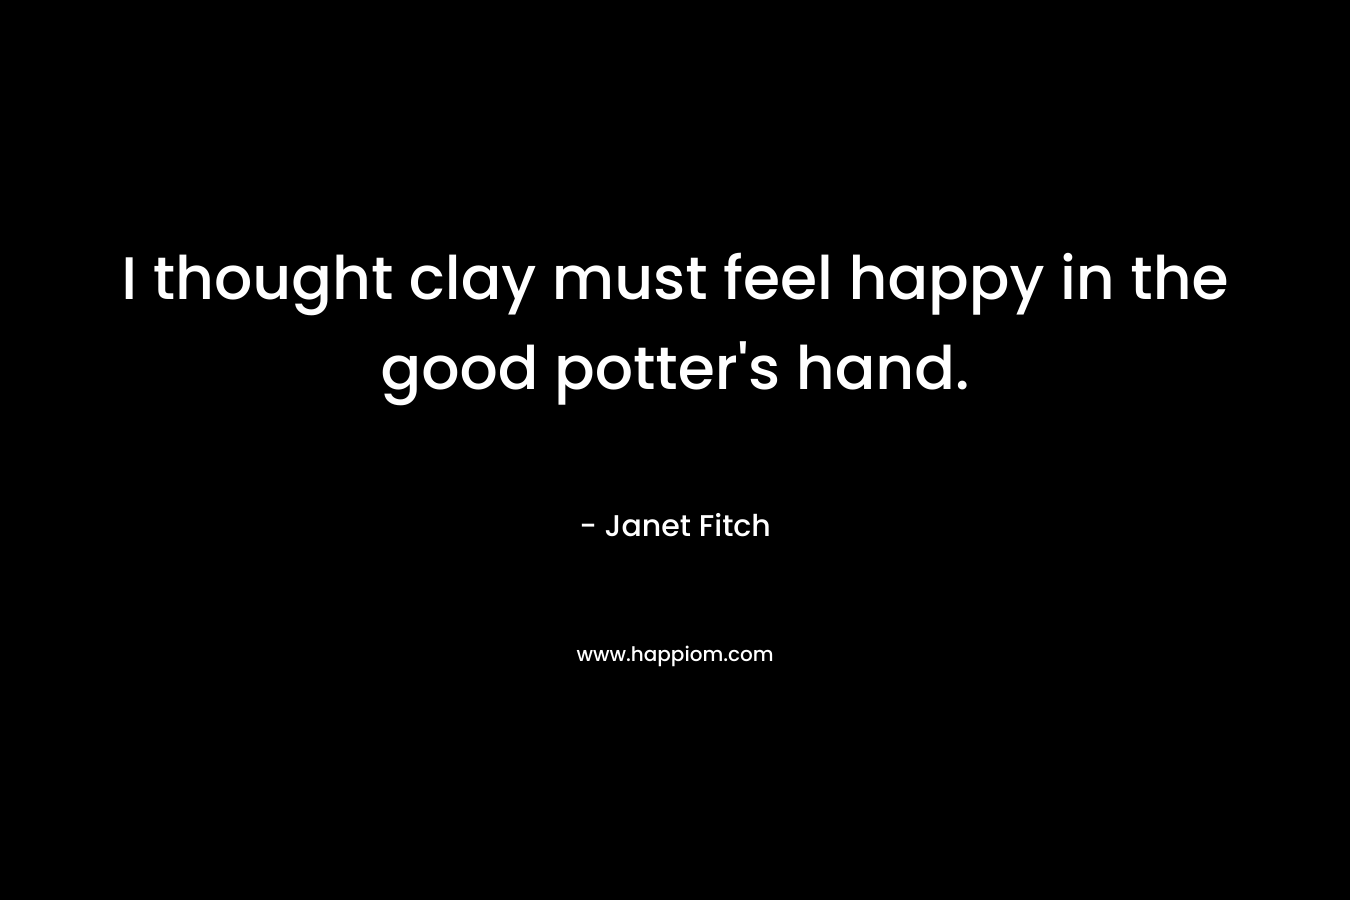 I thought clay must feel happy in the good potter's hand.